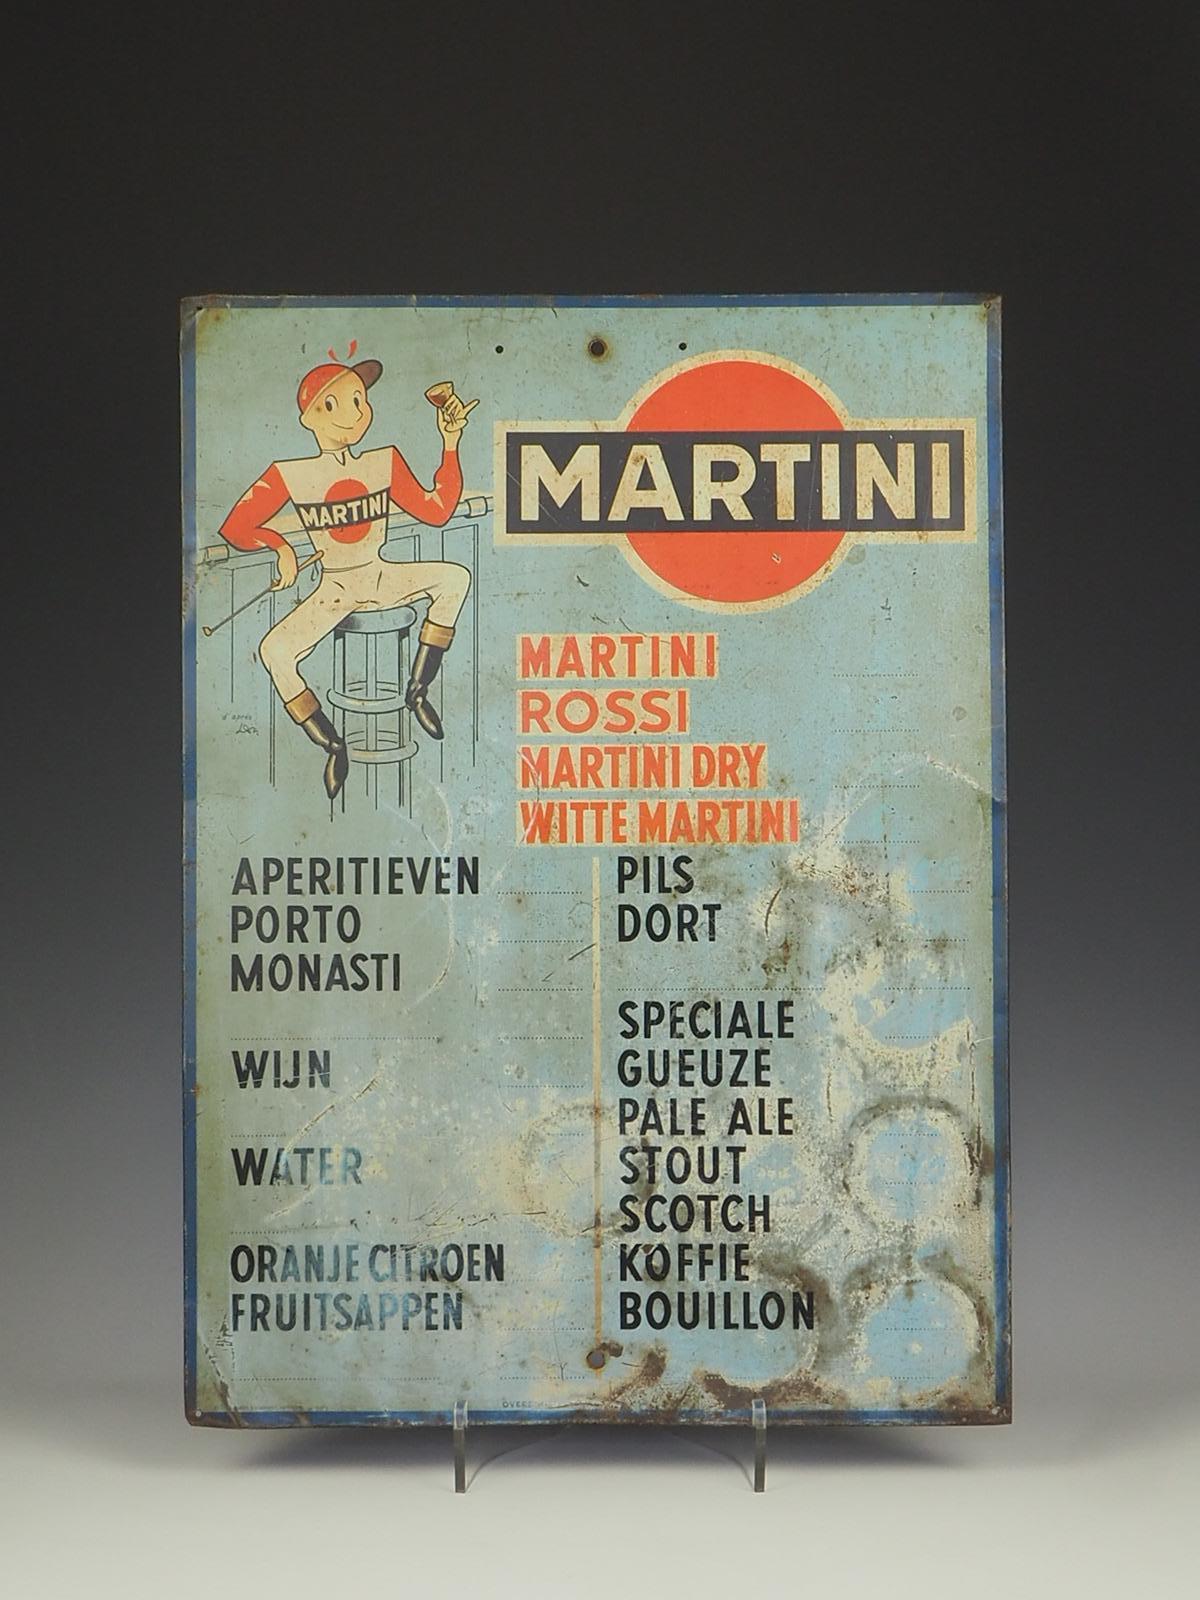 Description

1950s Martini Advertising Drinks Sign Jockey Leon

This plate was used to display the price of drinks.

Rare bistro-themed plate from the late 1950s, is quite hard to find these days

This painted sheet metal plate was illustrated by